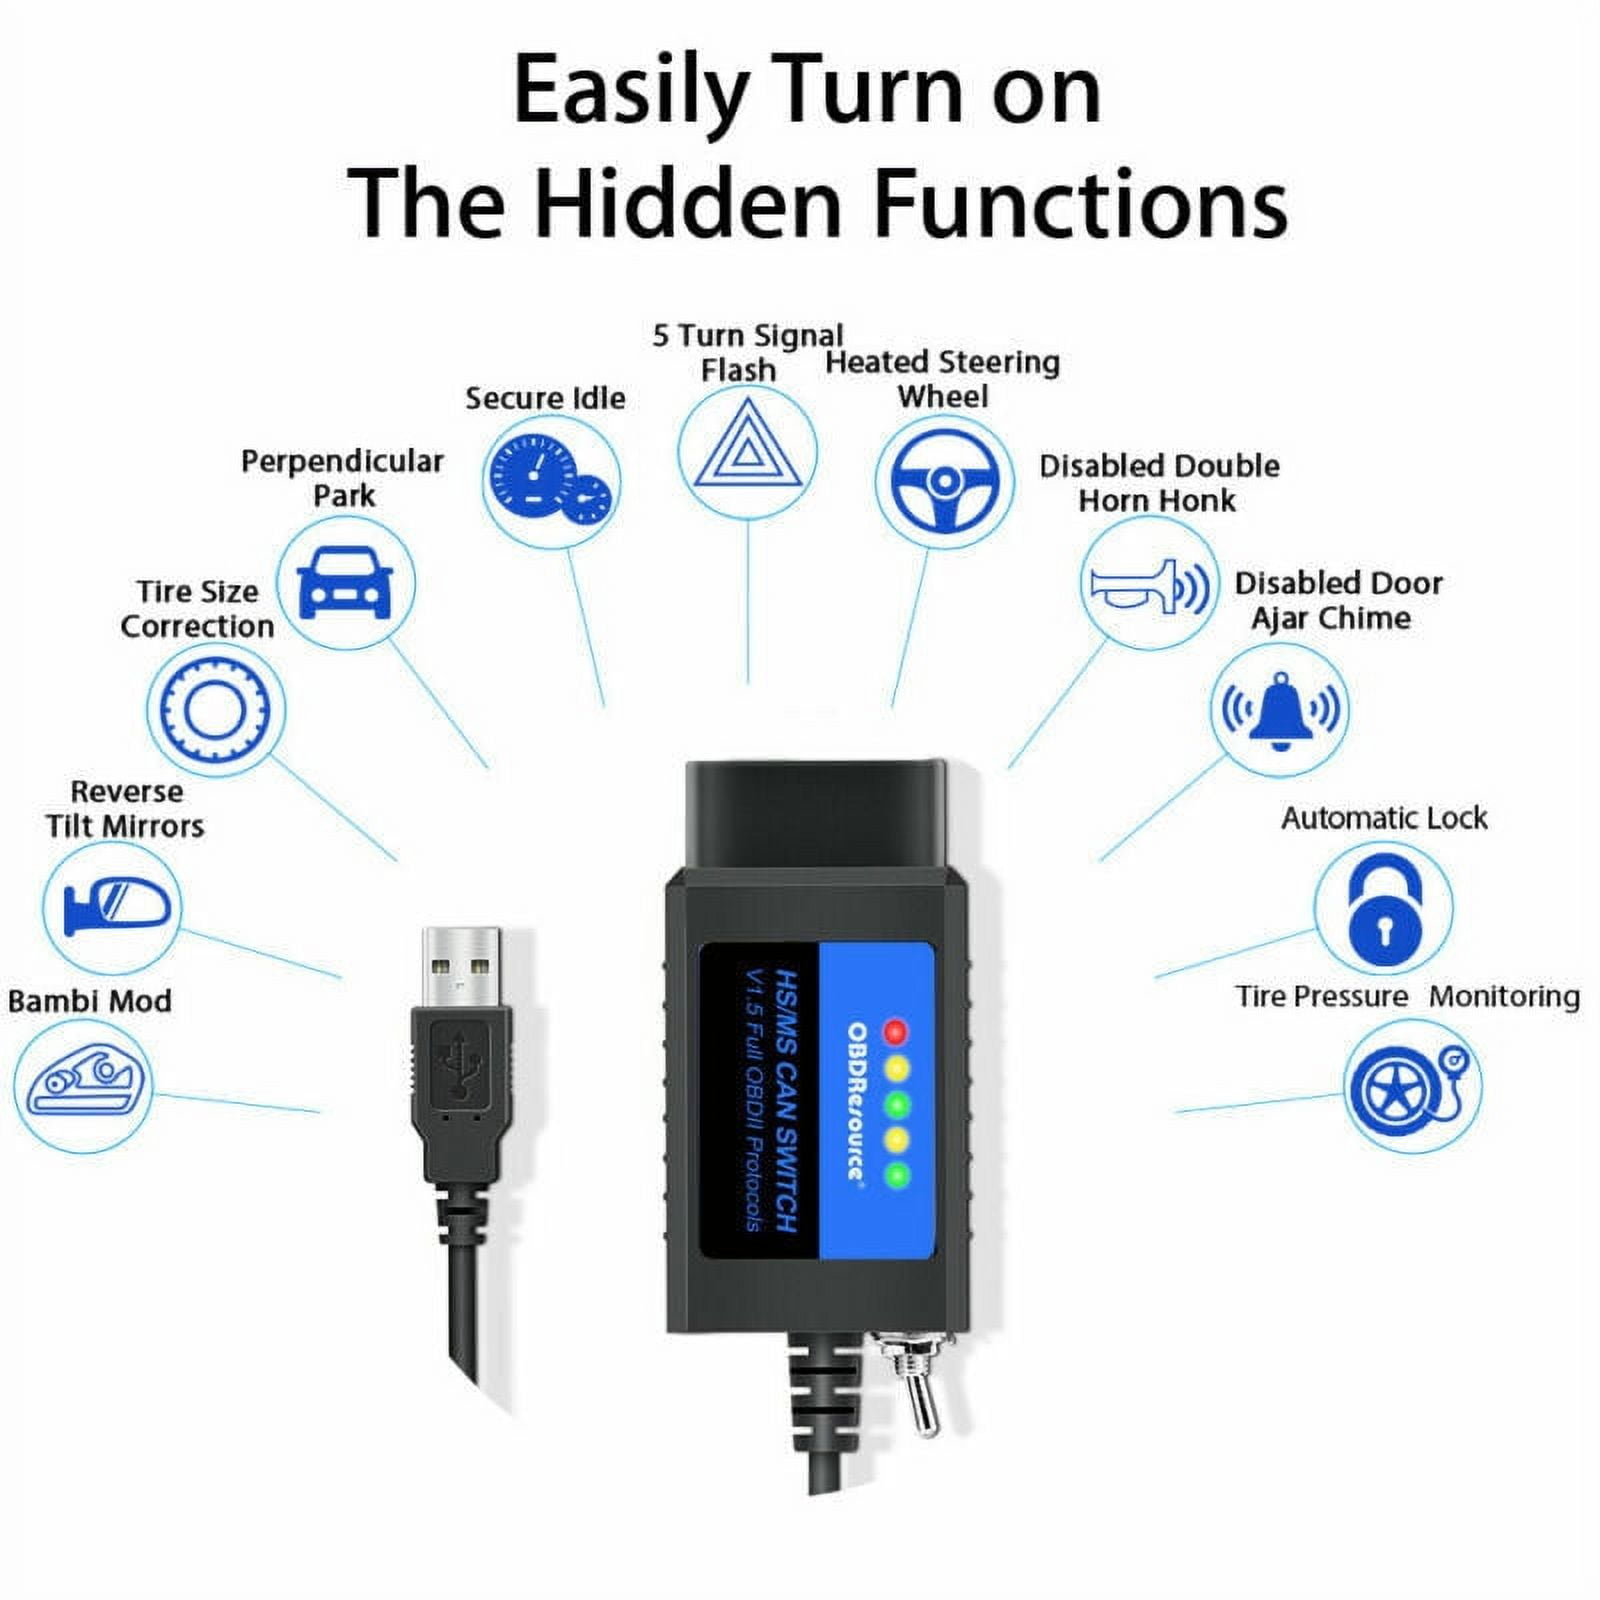 ELM327 Bluetooth OBD2 Android Reader with HS-CAN/MS-CAN- Diagnostic Code  Scanner - GeeWiz